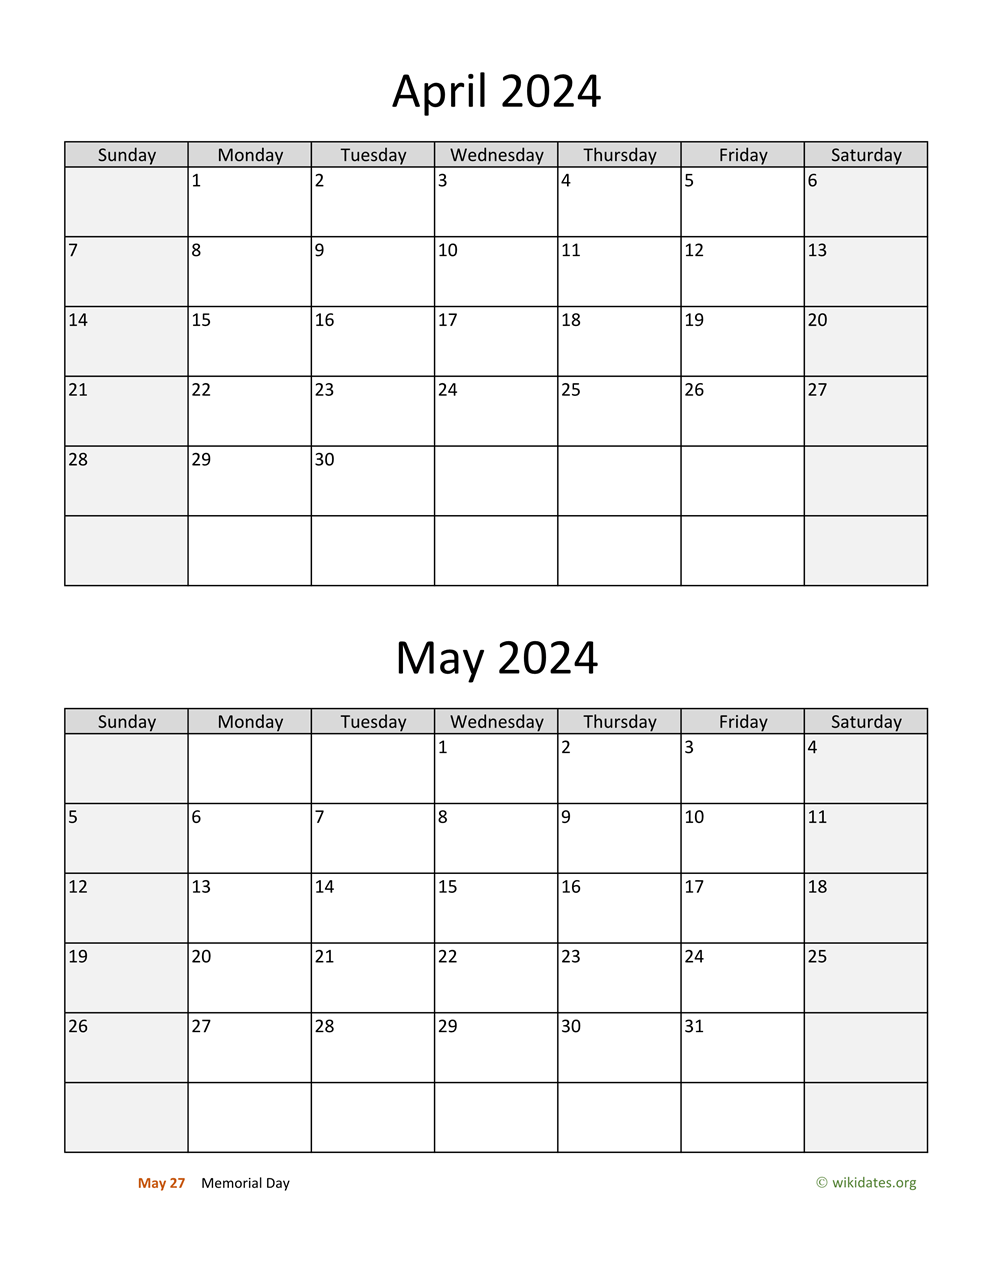 April And May 2024 Calendar | Wikidates for March April May 2024 Calendar Printable